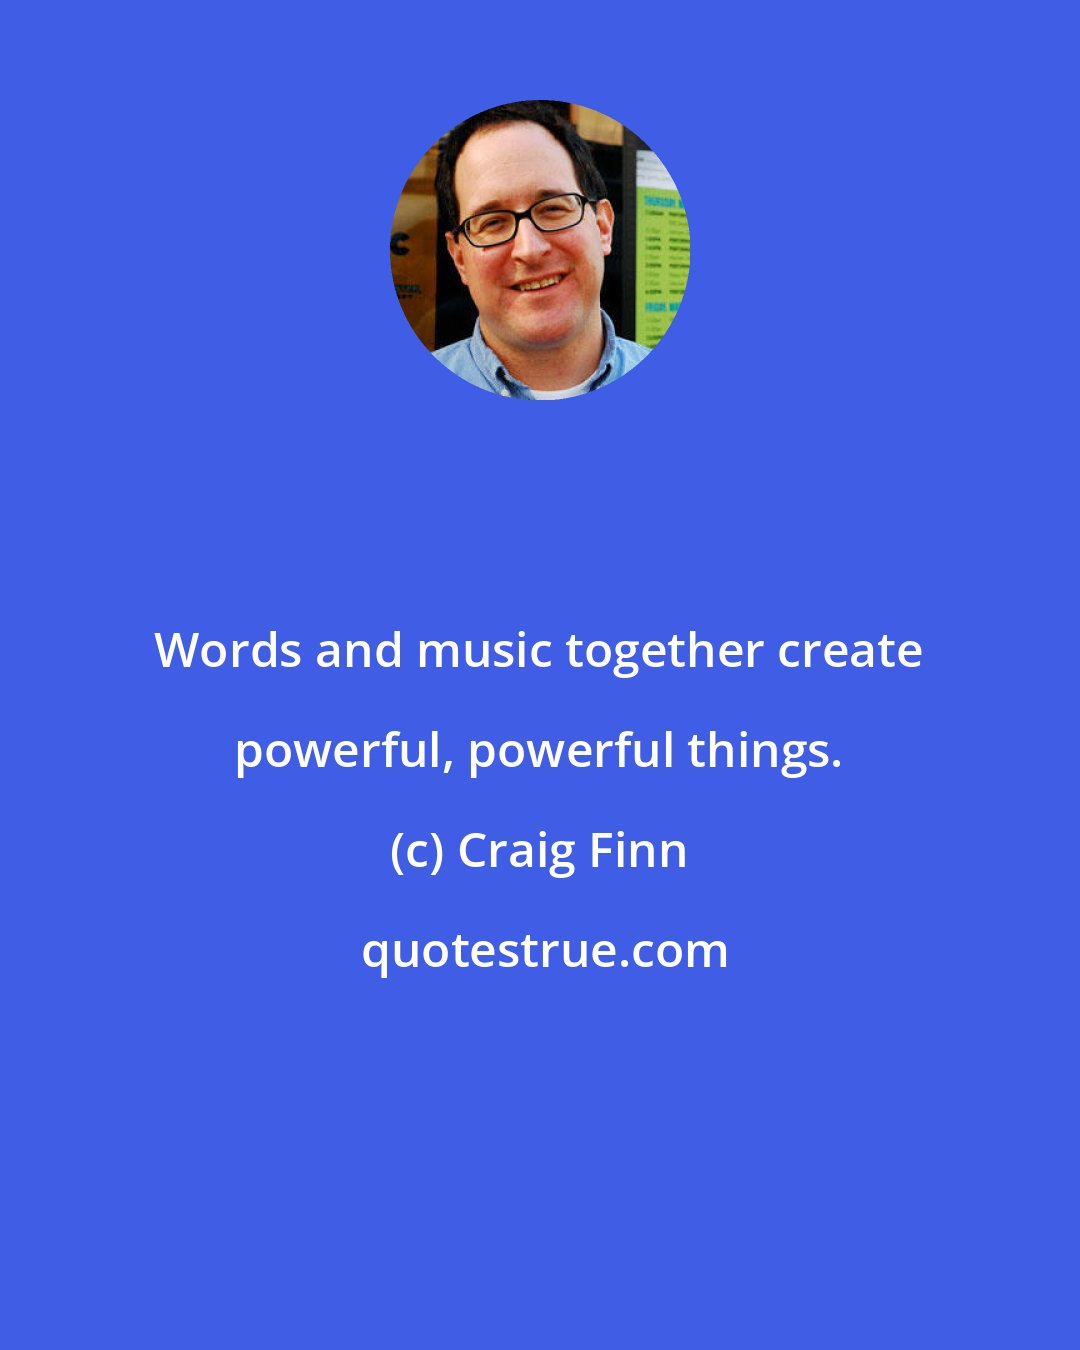 Craig Finn: Words and music together create powerful, powerful things.